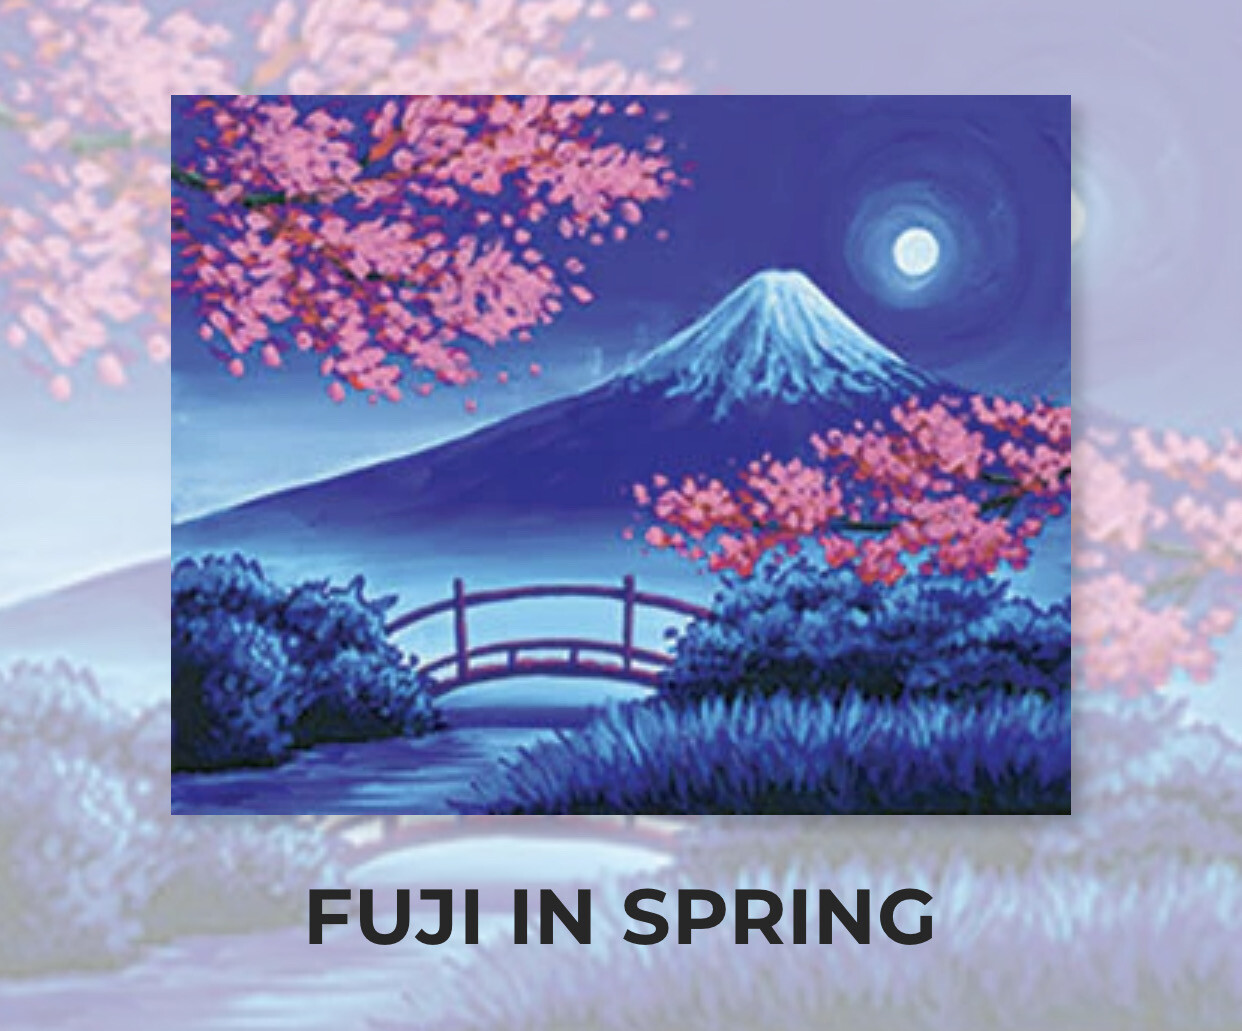 Fuji In Spring ADULT Acrylic Paint On Canvas DIY Art Kit - 3 Week Special Order